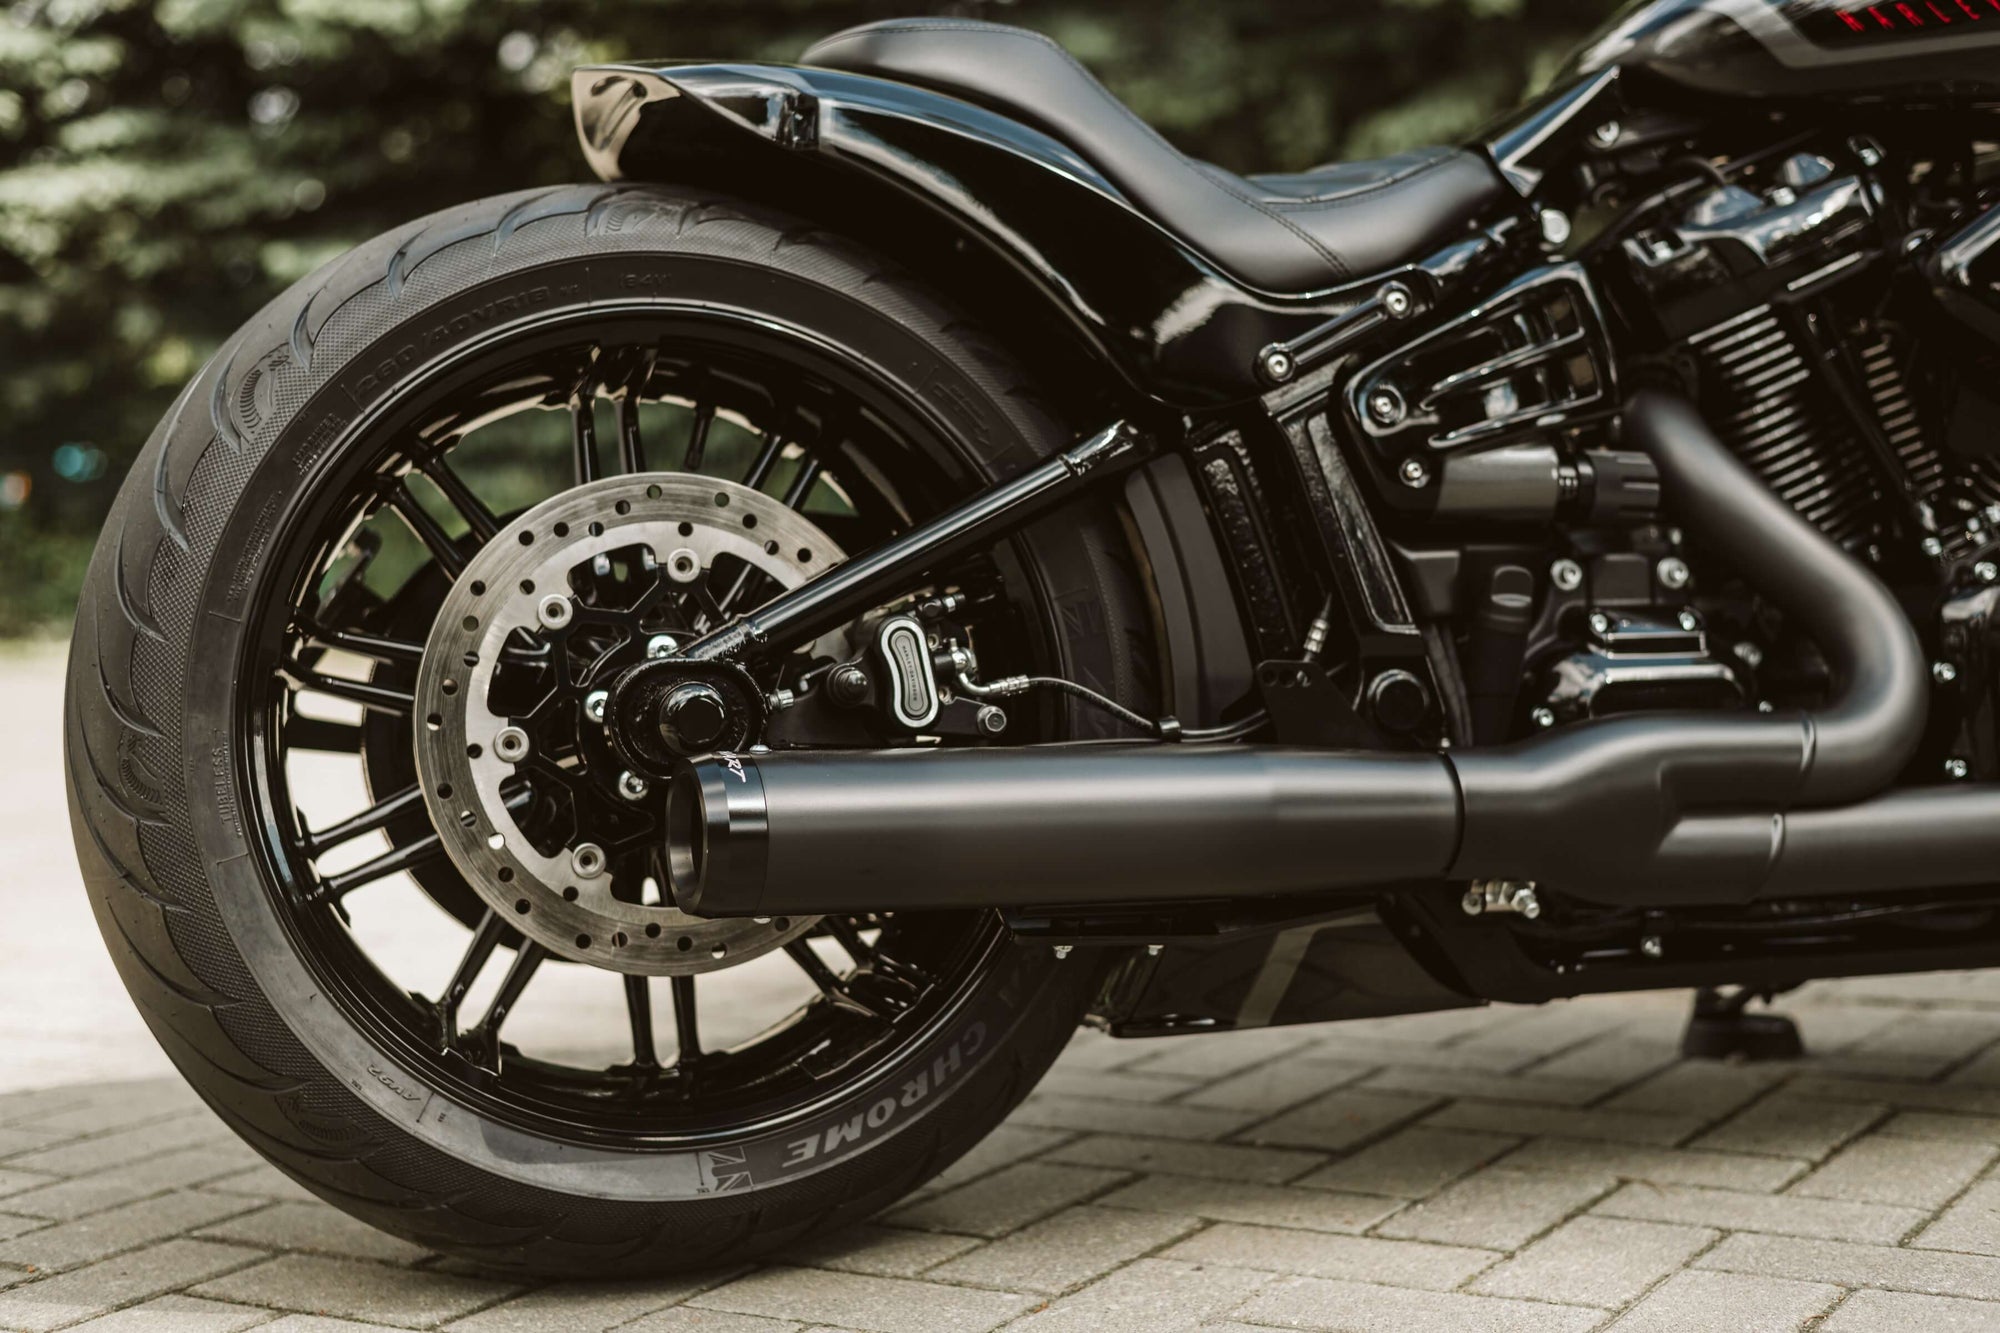 Zoomed Harley Davidson Breakout motorcycle with Killer Custom parts from the side blurred nature background